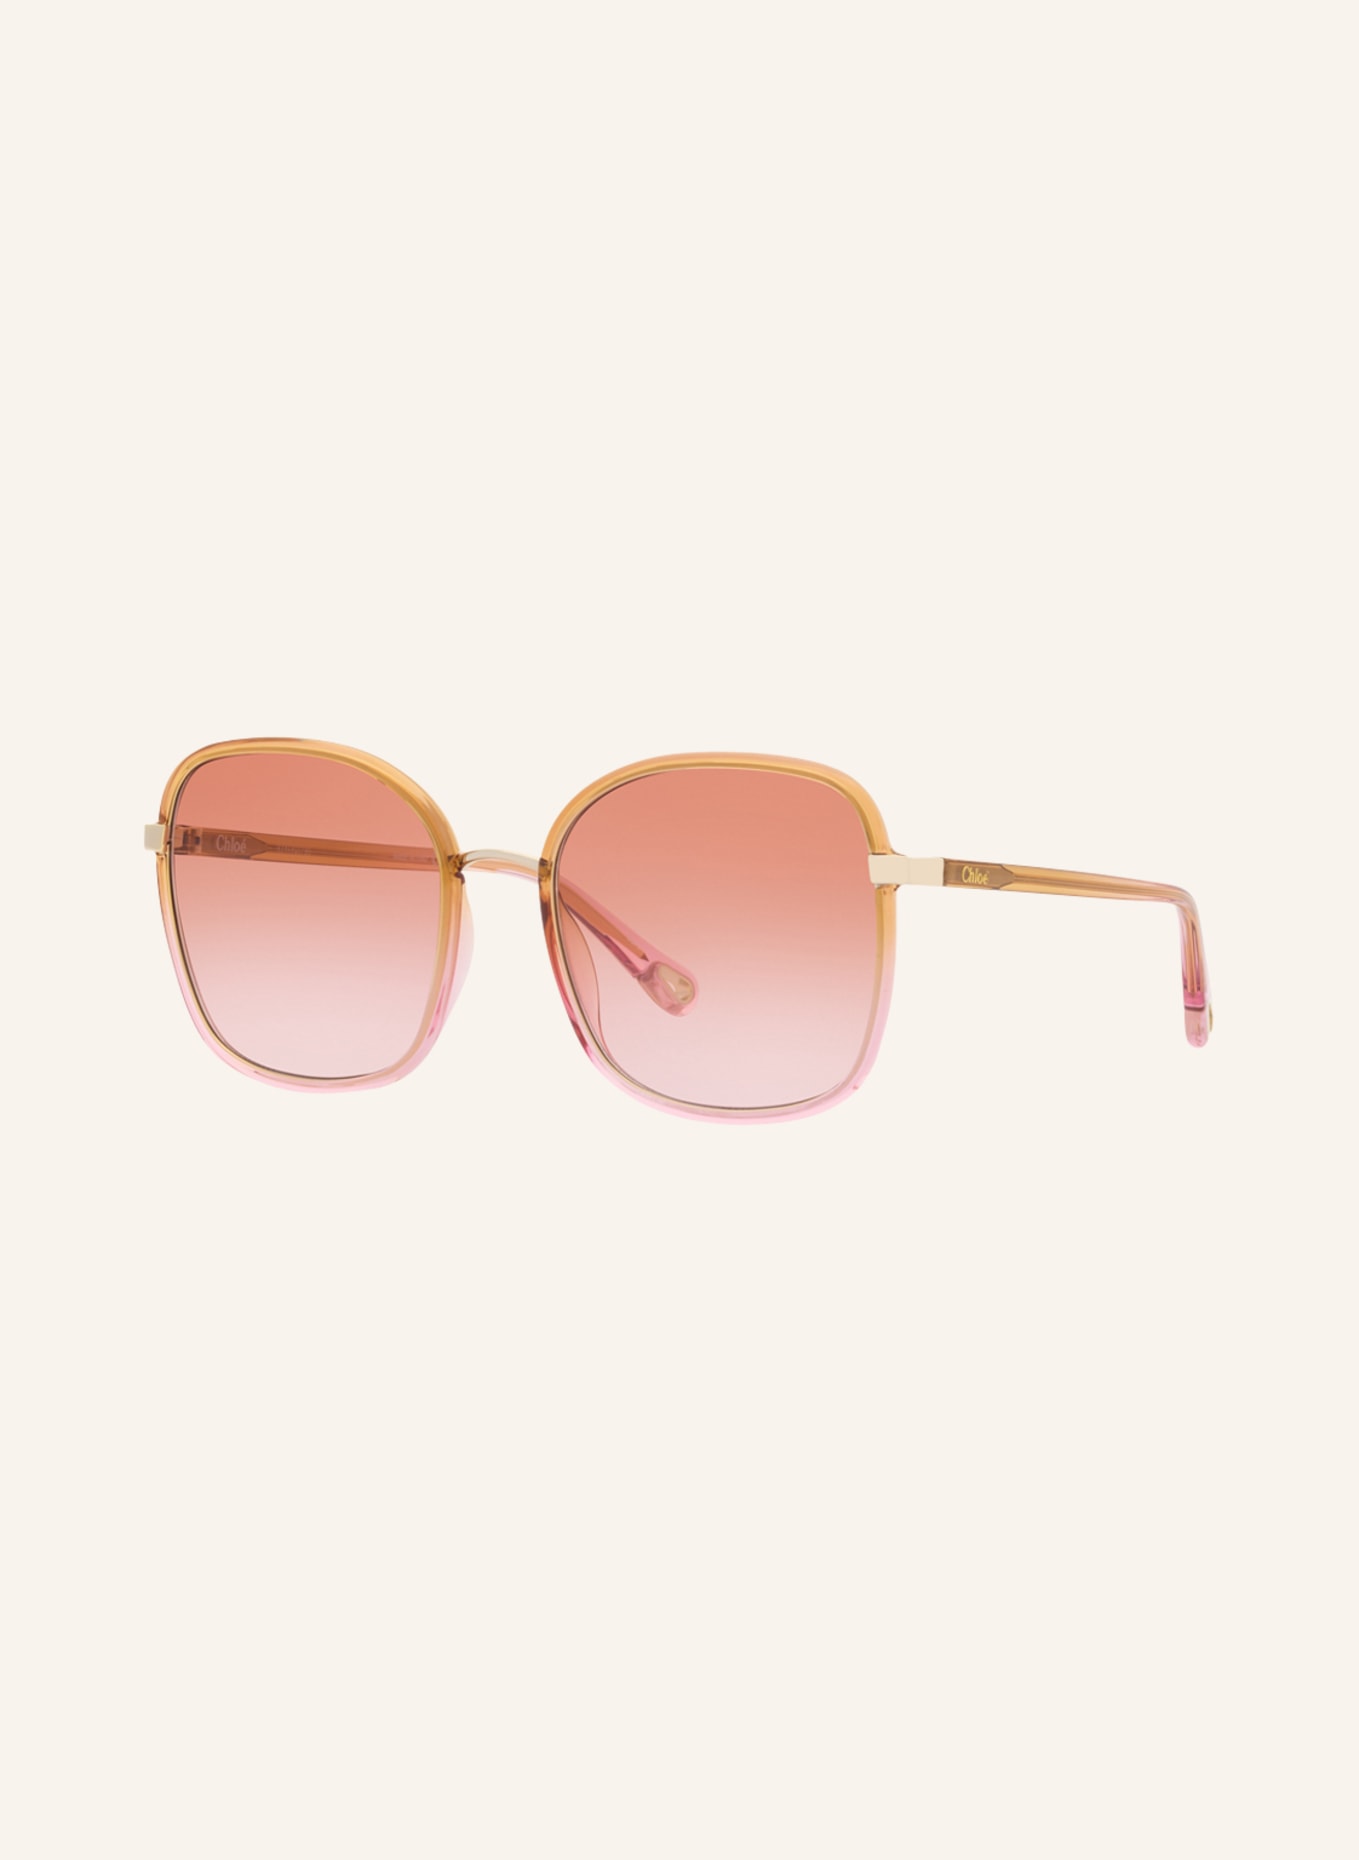 Chloé Sunglasses CH0031S, Color: 5000P1 - YELLOW/ PINK/ PINK GRADIENT (Image 1)